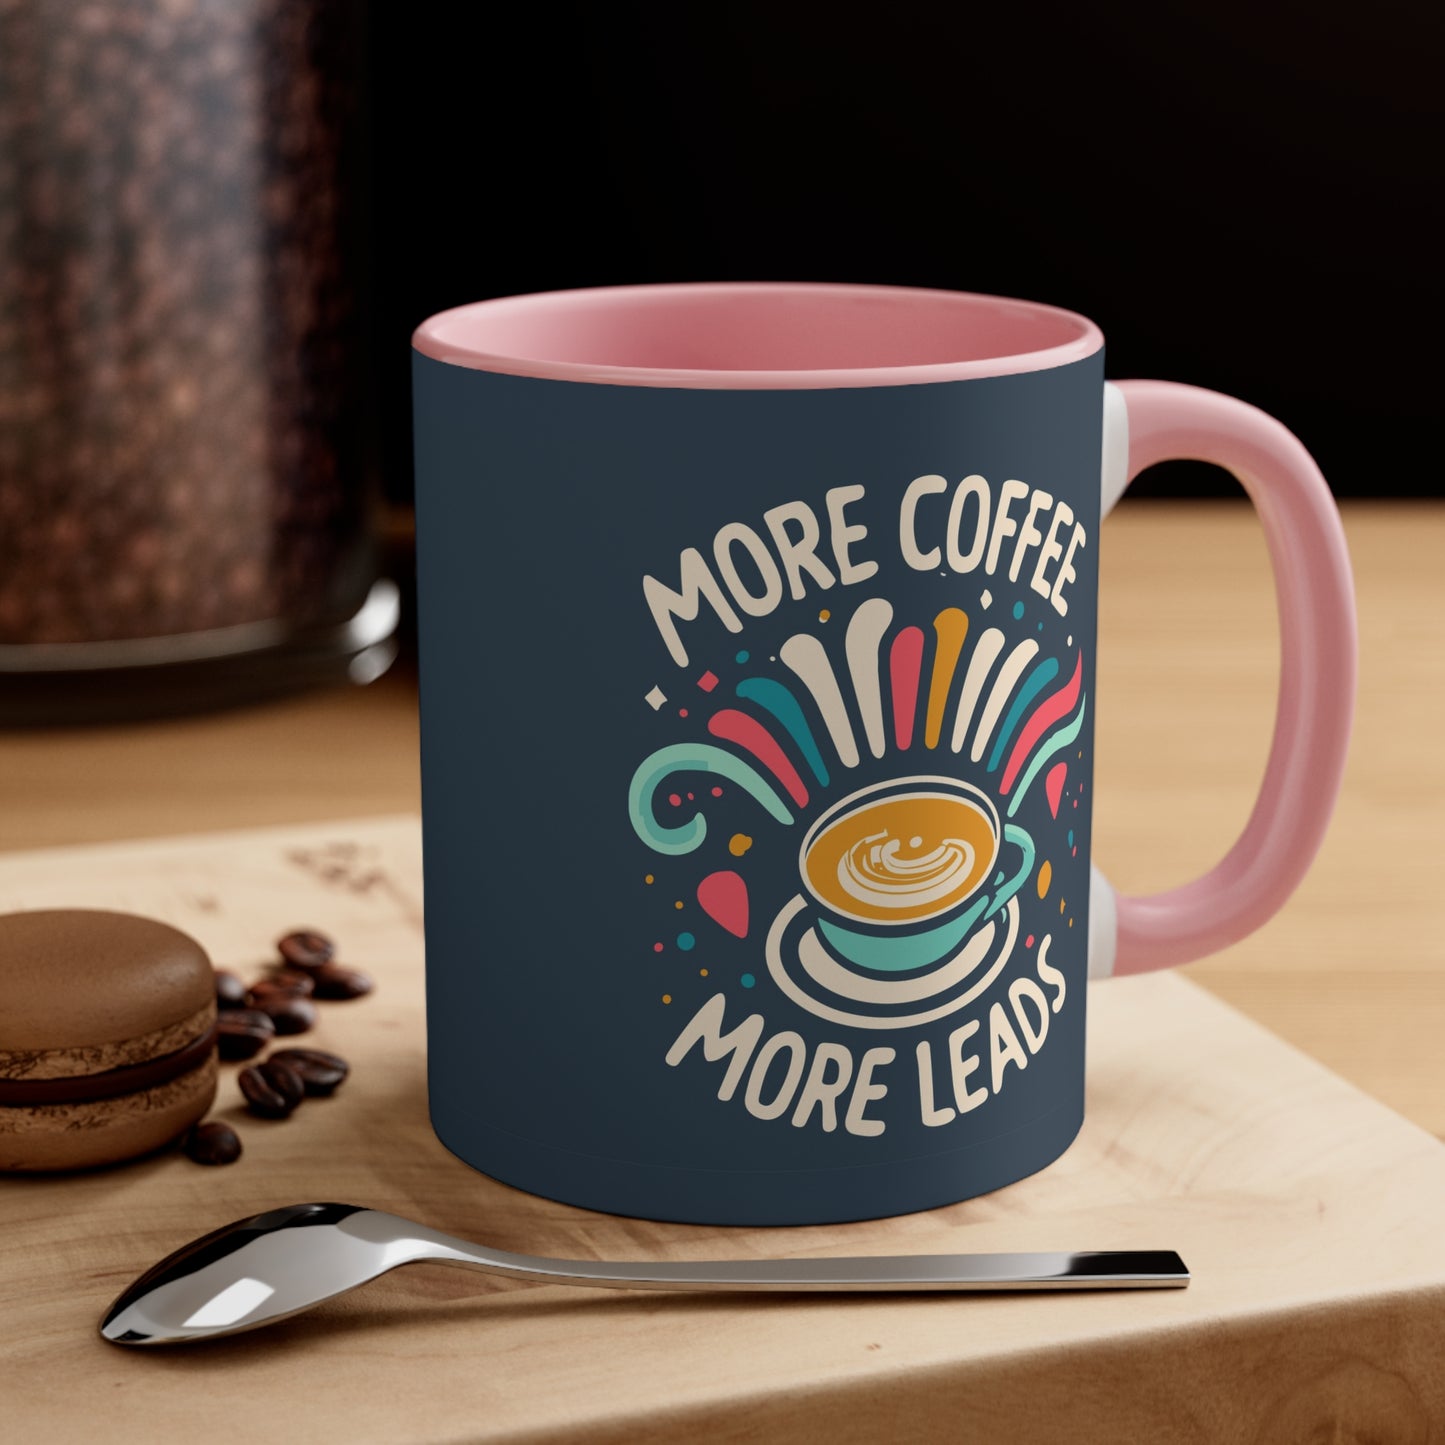 More coffee, more leads